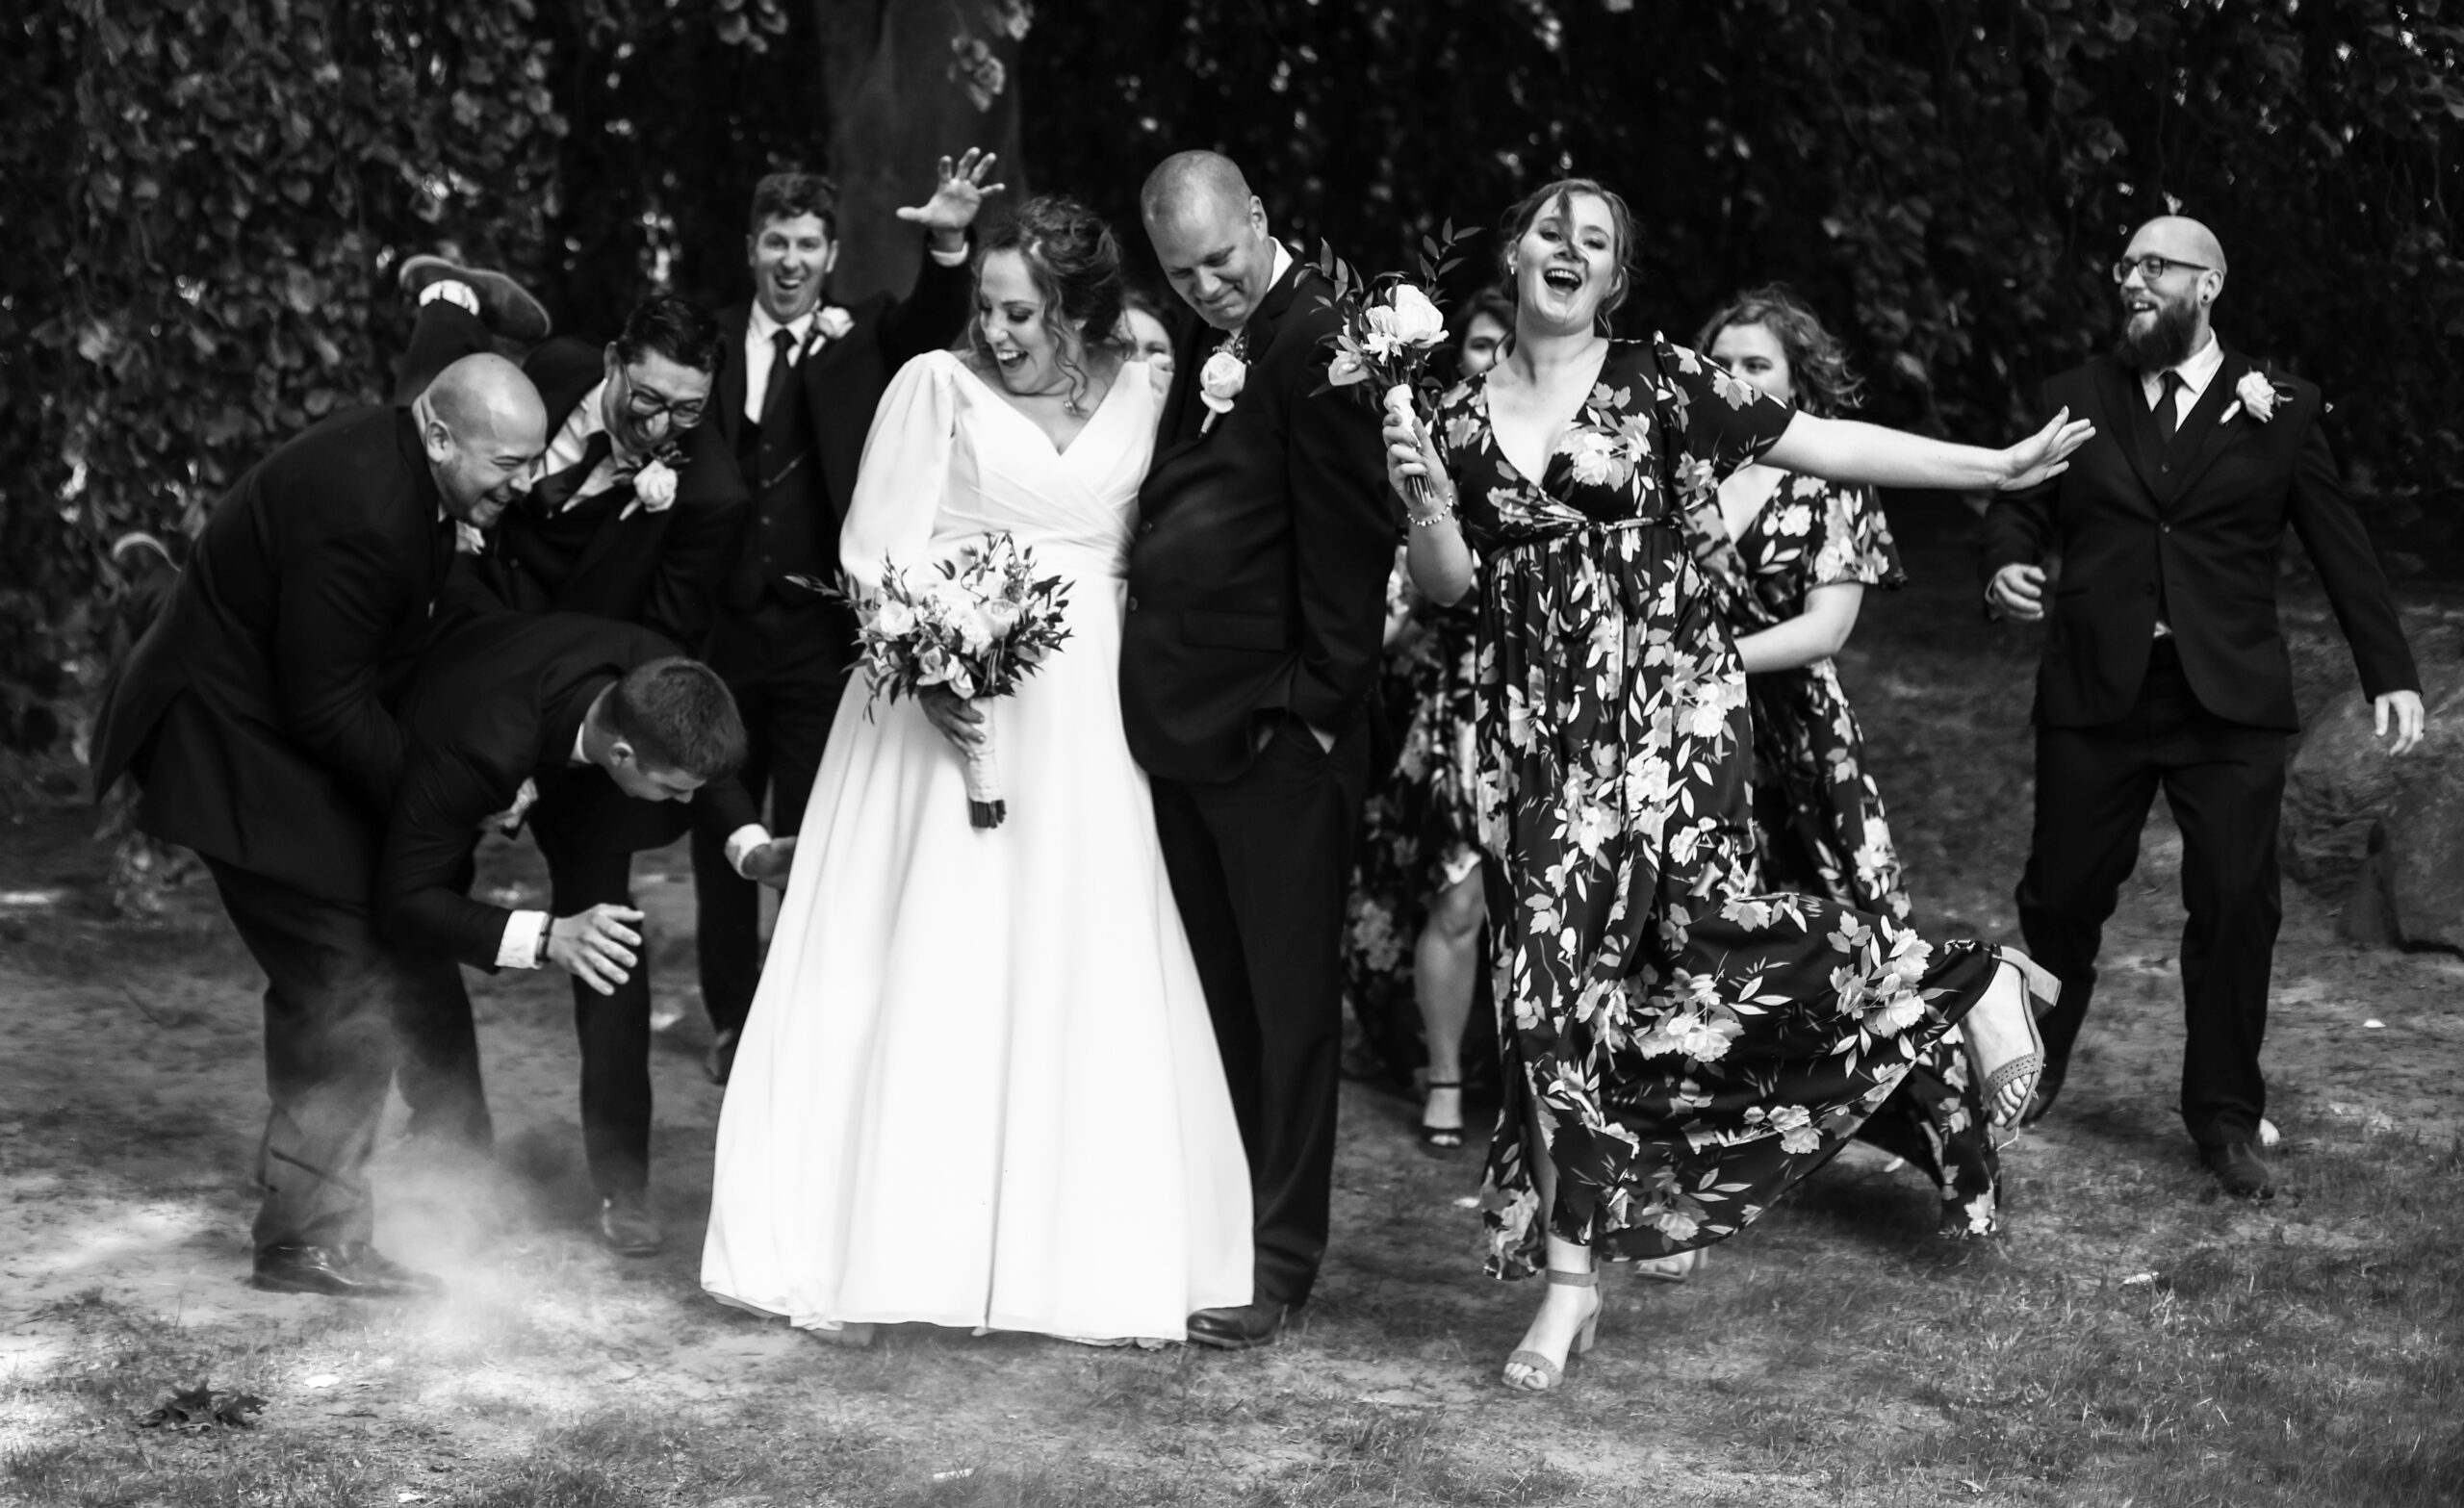 A wedding party laughing and acting silly for the photographer.